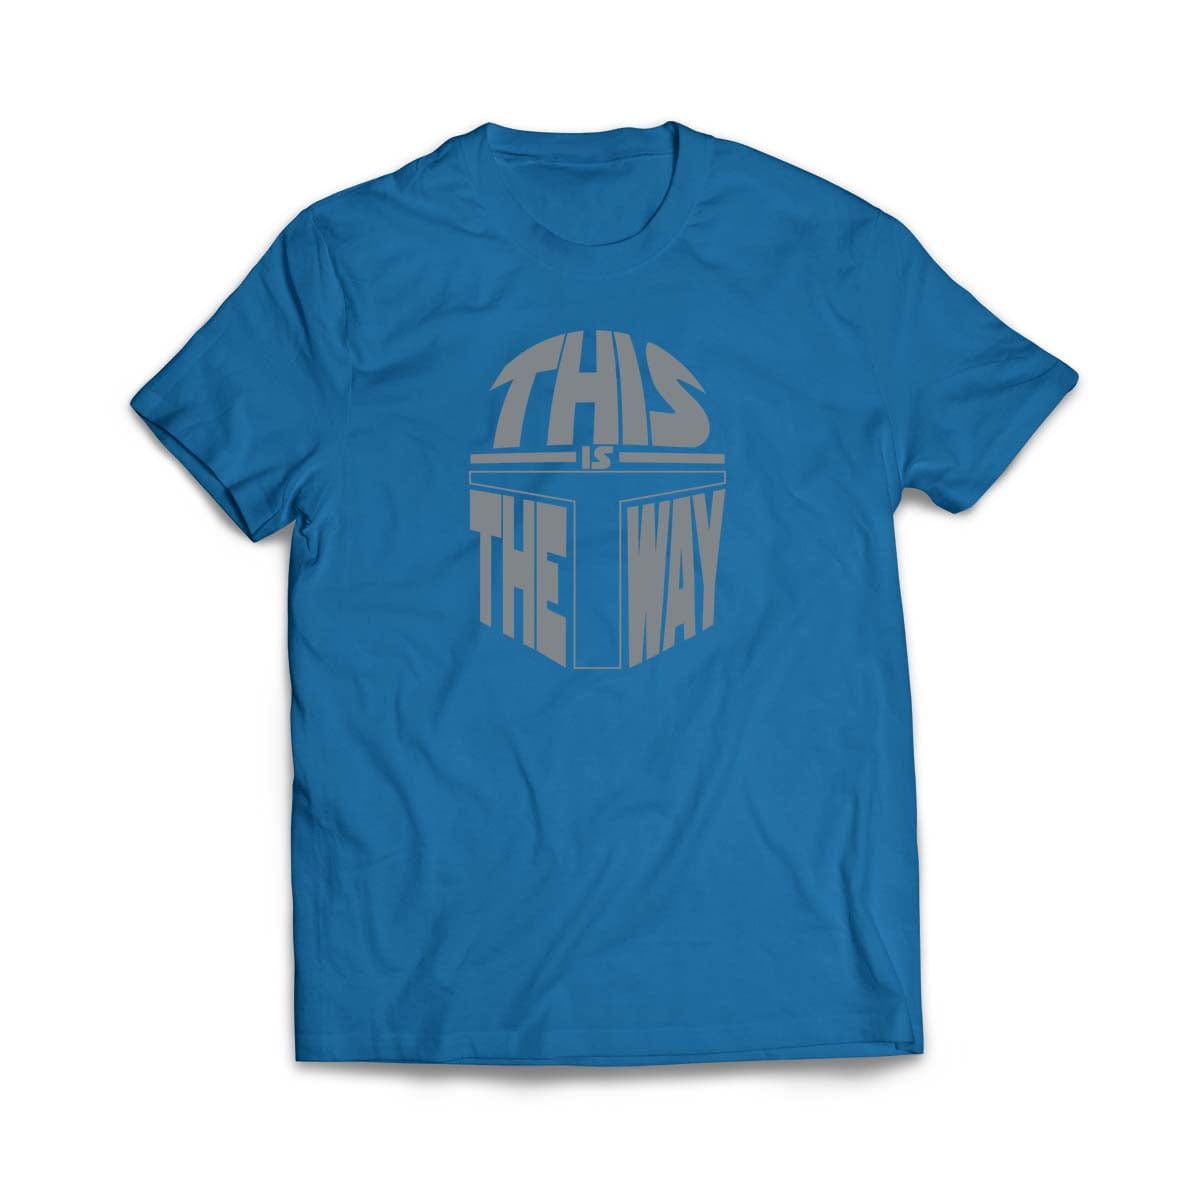 This Is the Way Star Wars T-Shirt